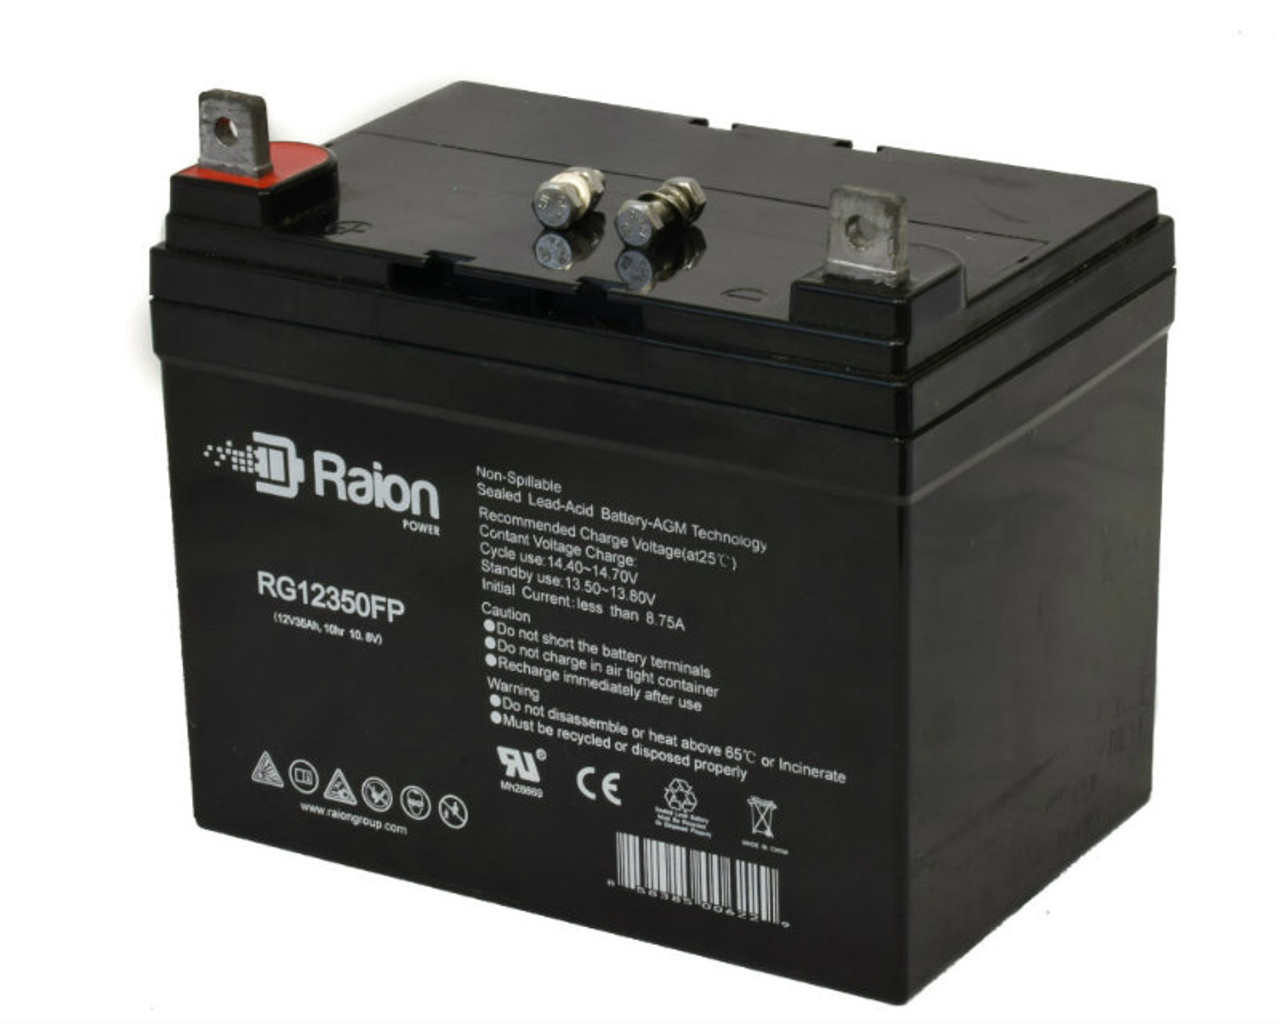 Raion Power Replacement 12V 35Ah Battery for Yard-Man W834H - 1 Pack